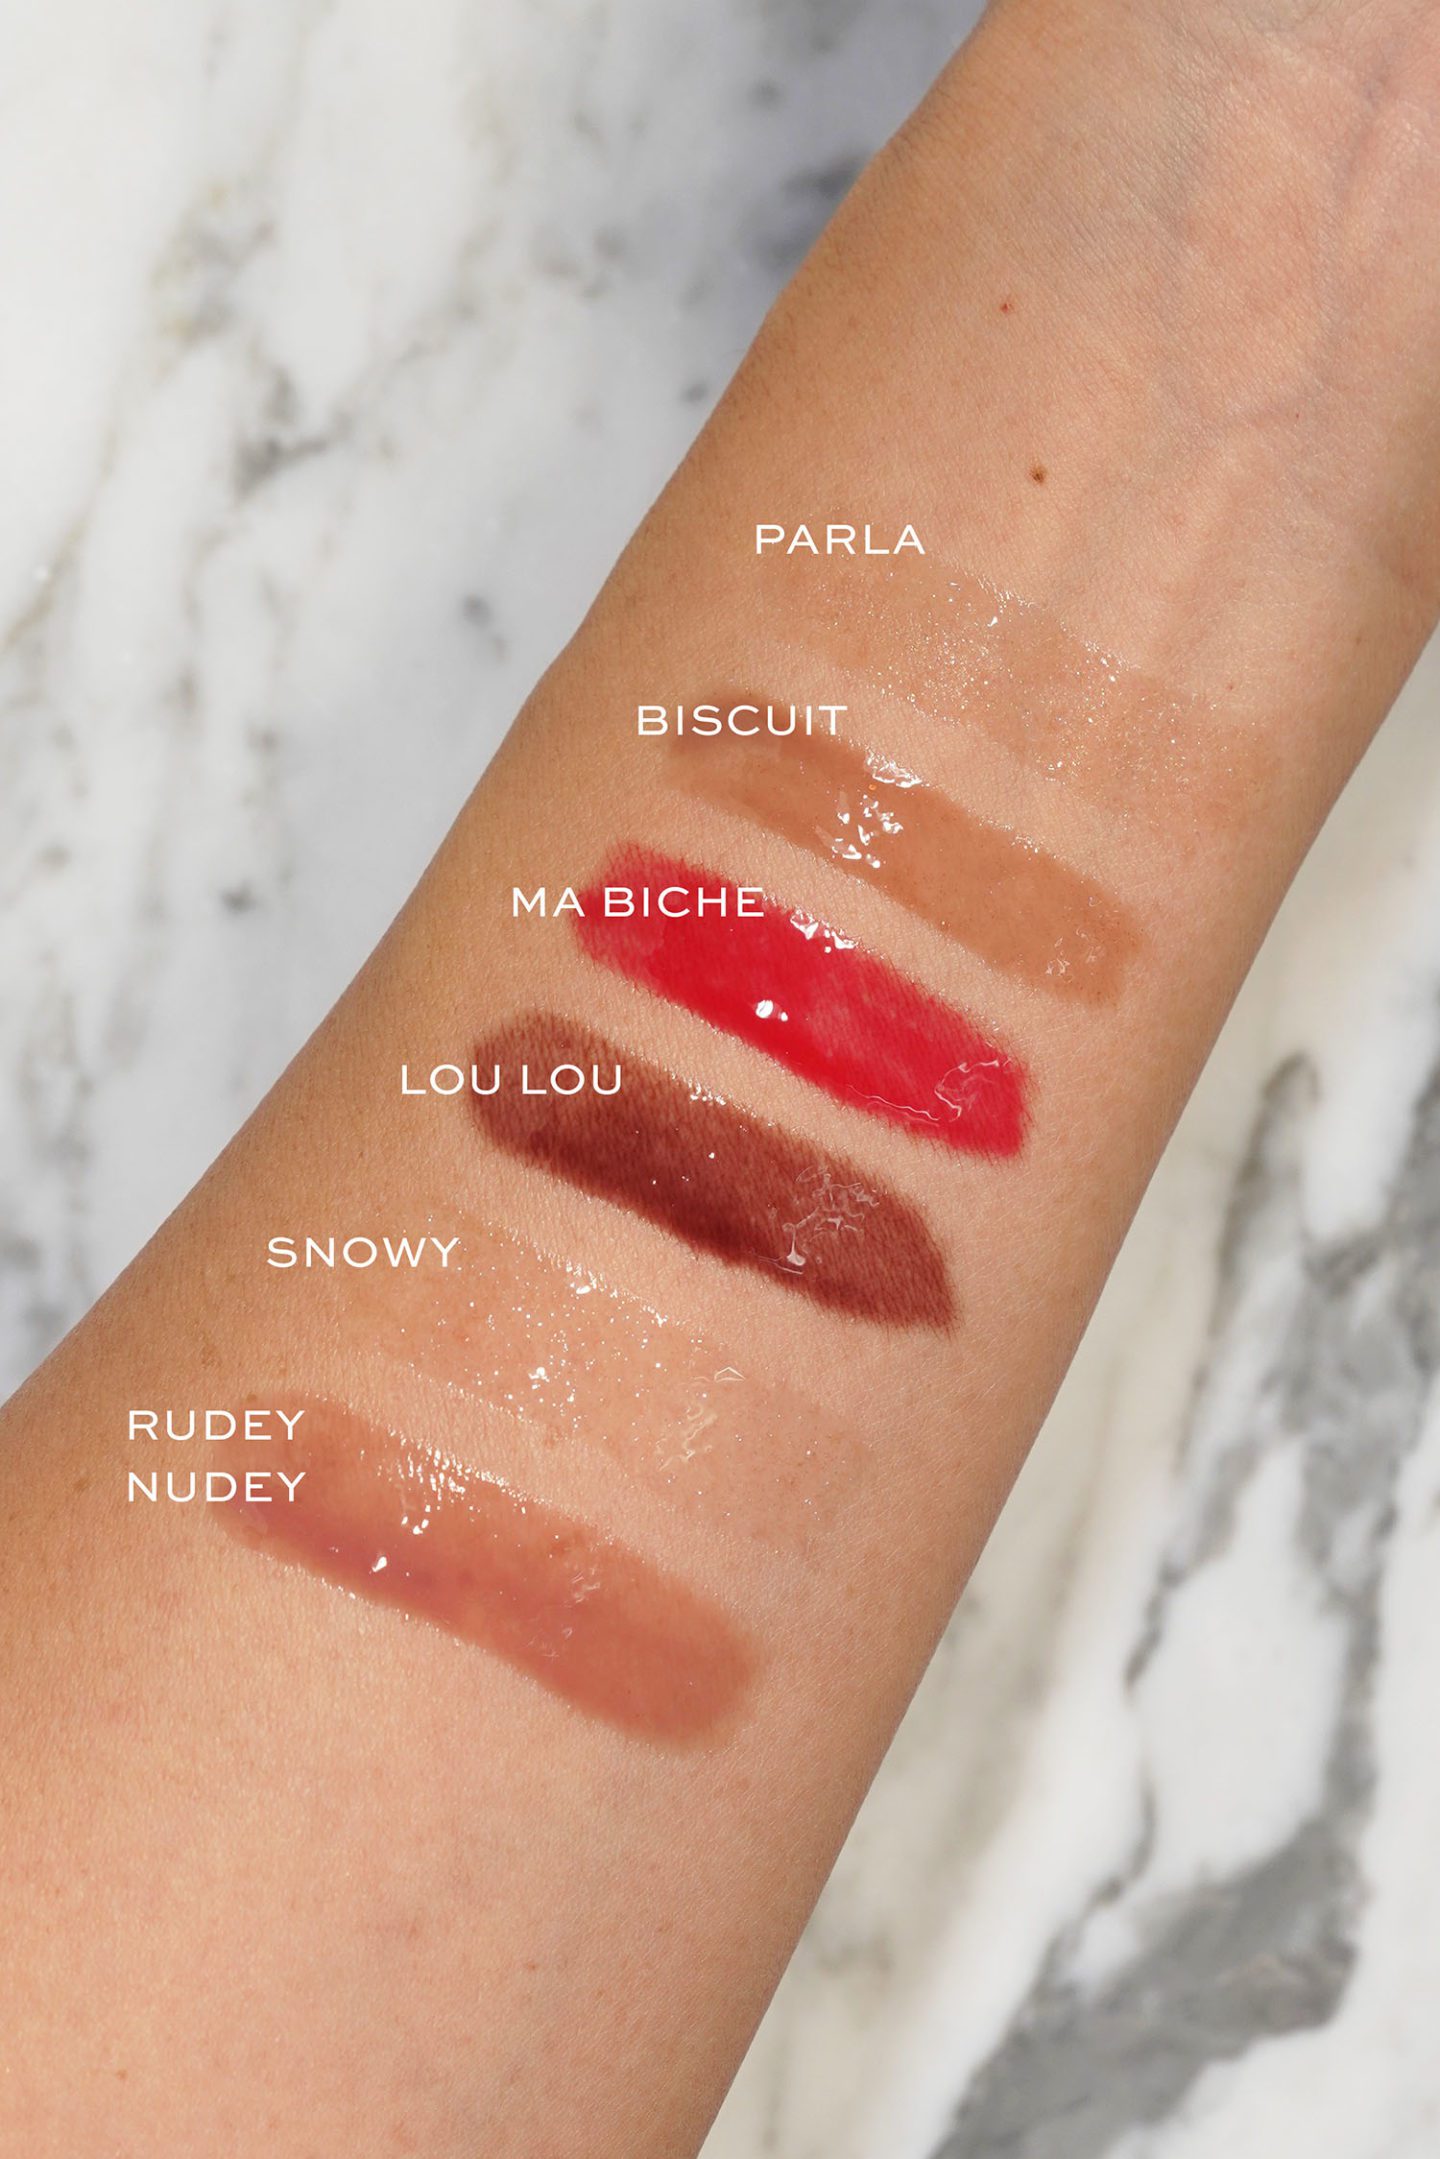 Westman Atelier The Squeaky Clean Vault swatches